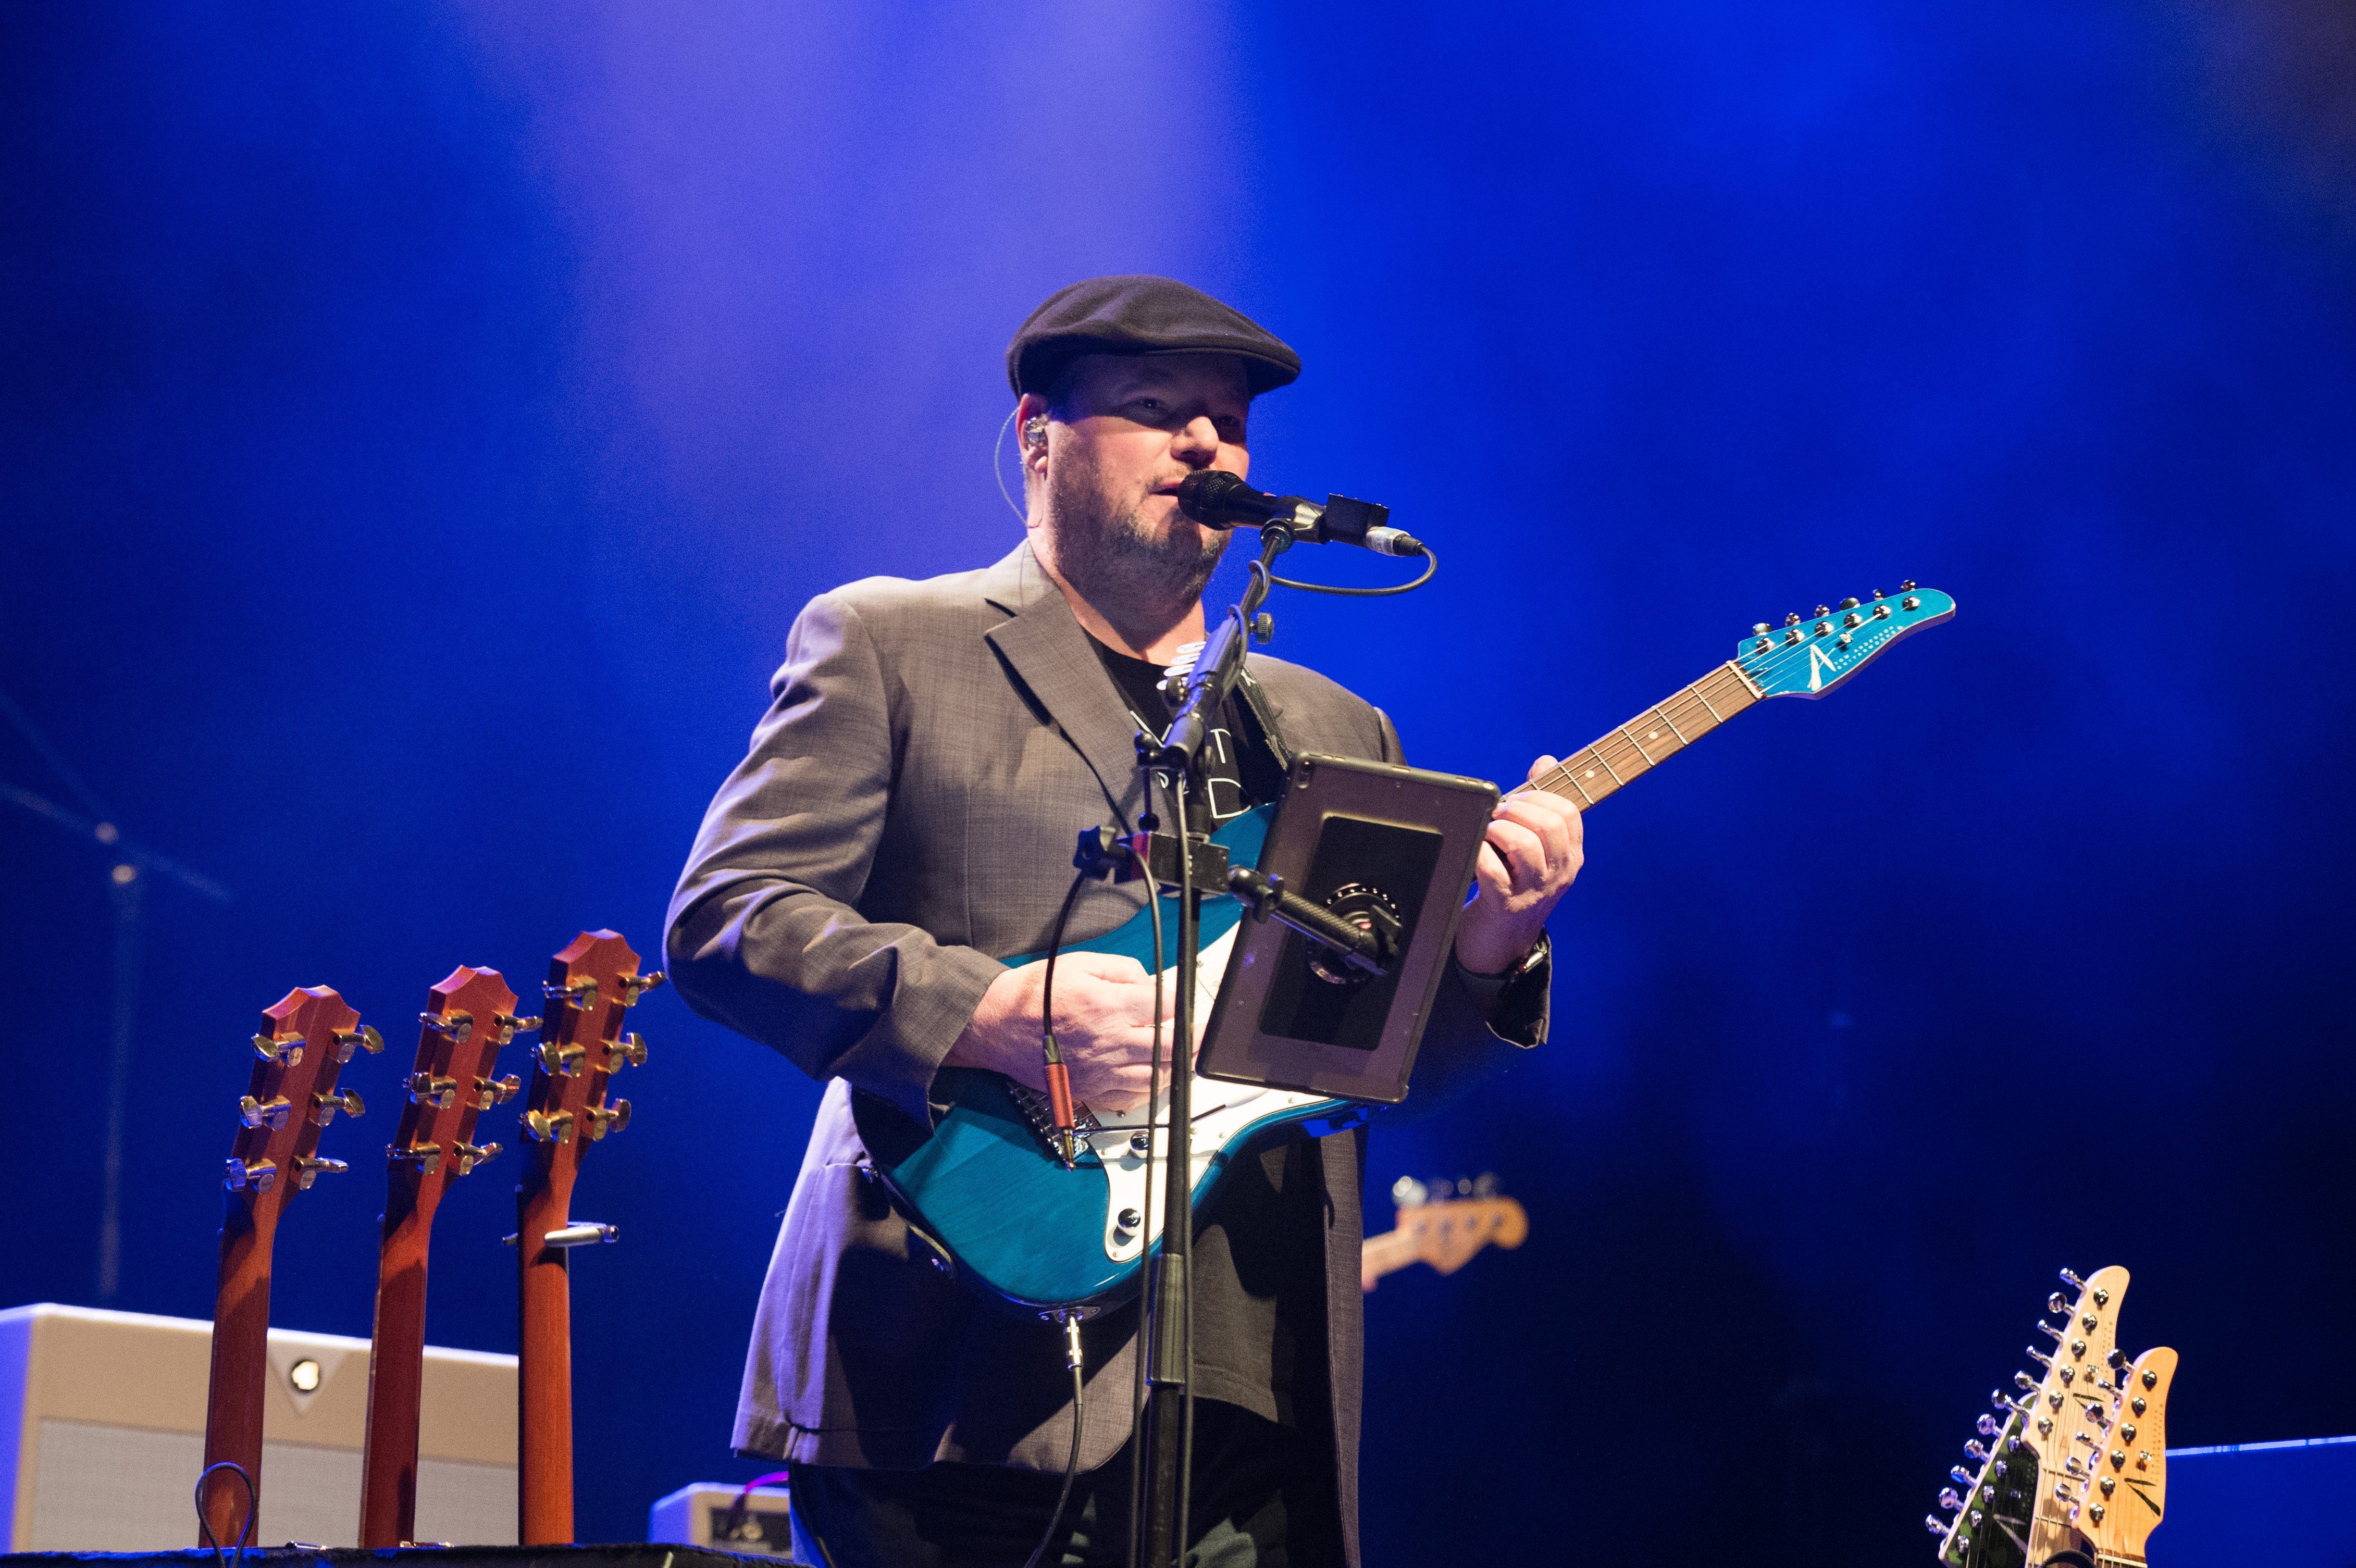 Christopher Cross performs at Le Trianon on November 18, 2018 in Paris, France.